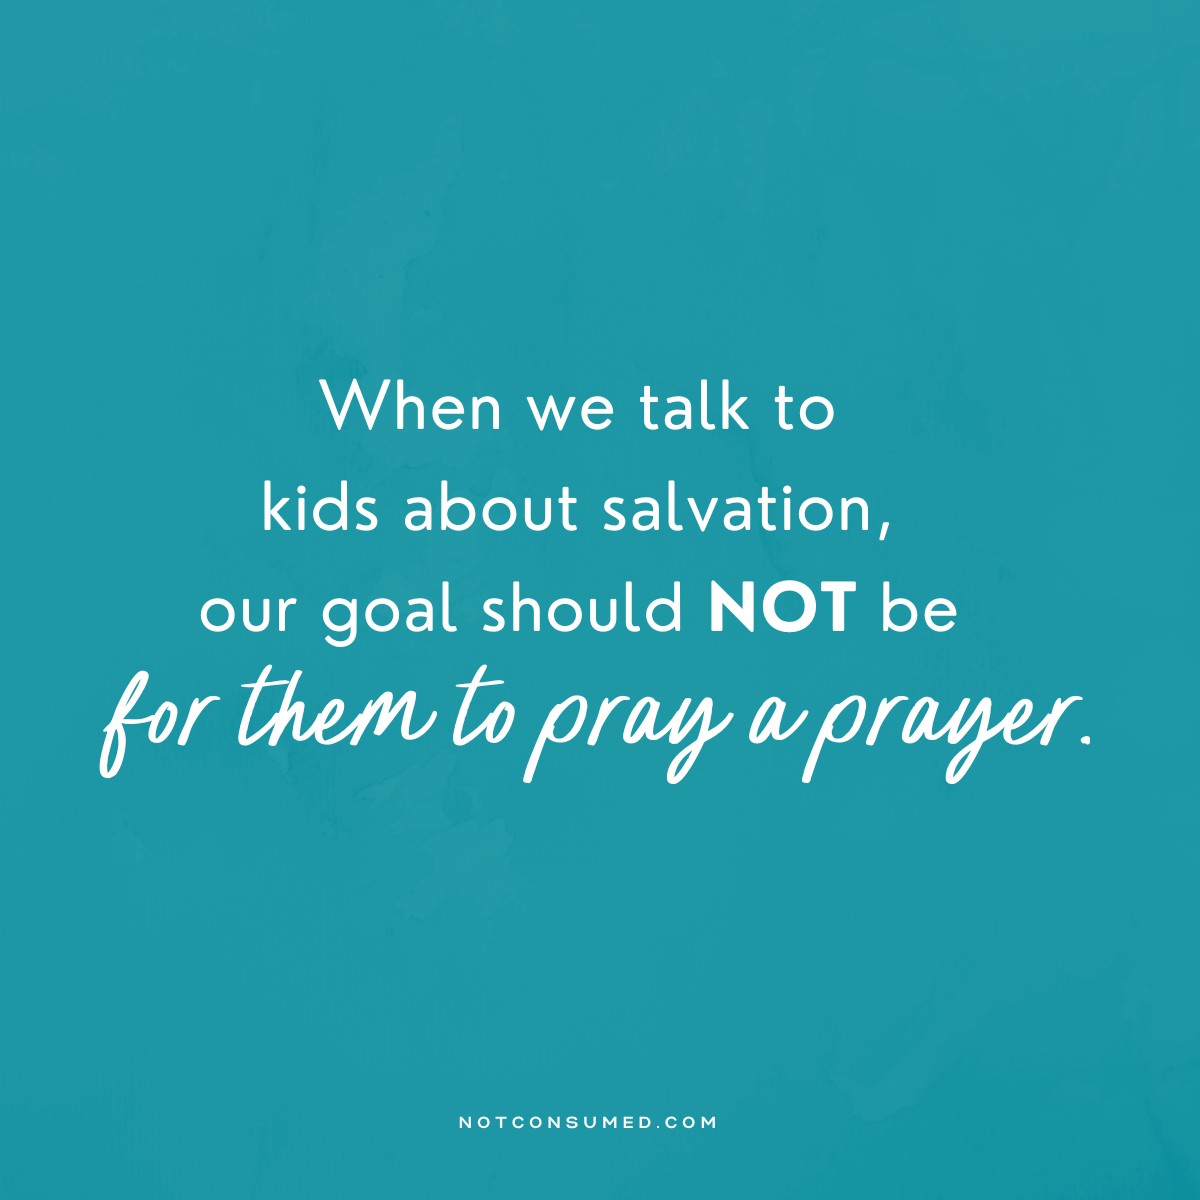 Talk about salvation with kids quote 2